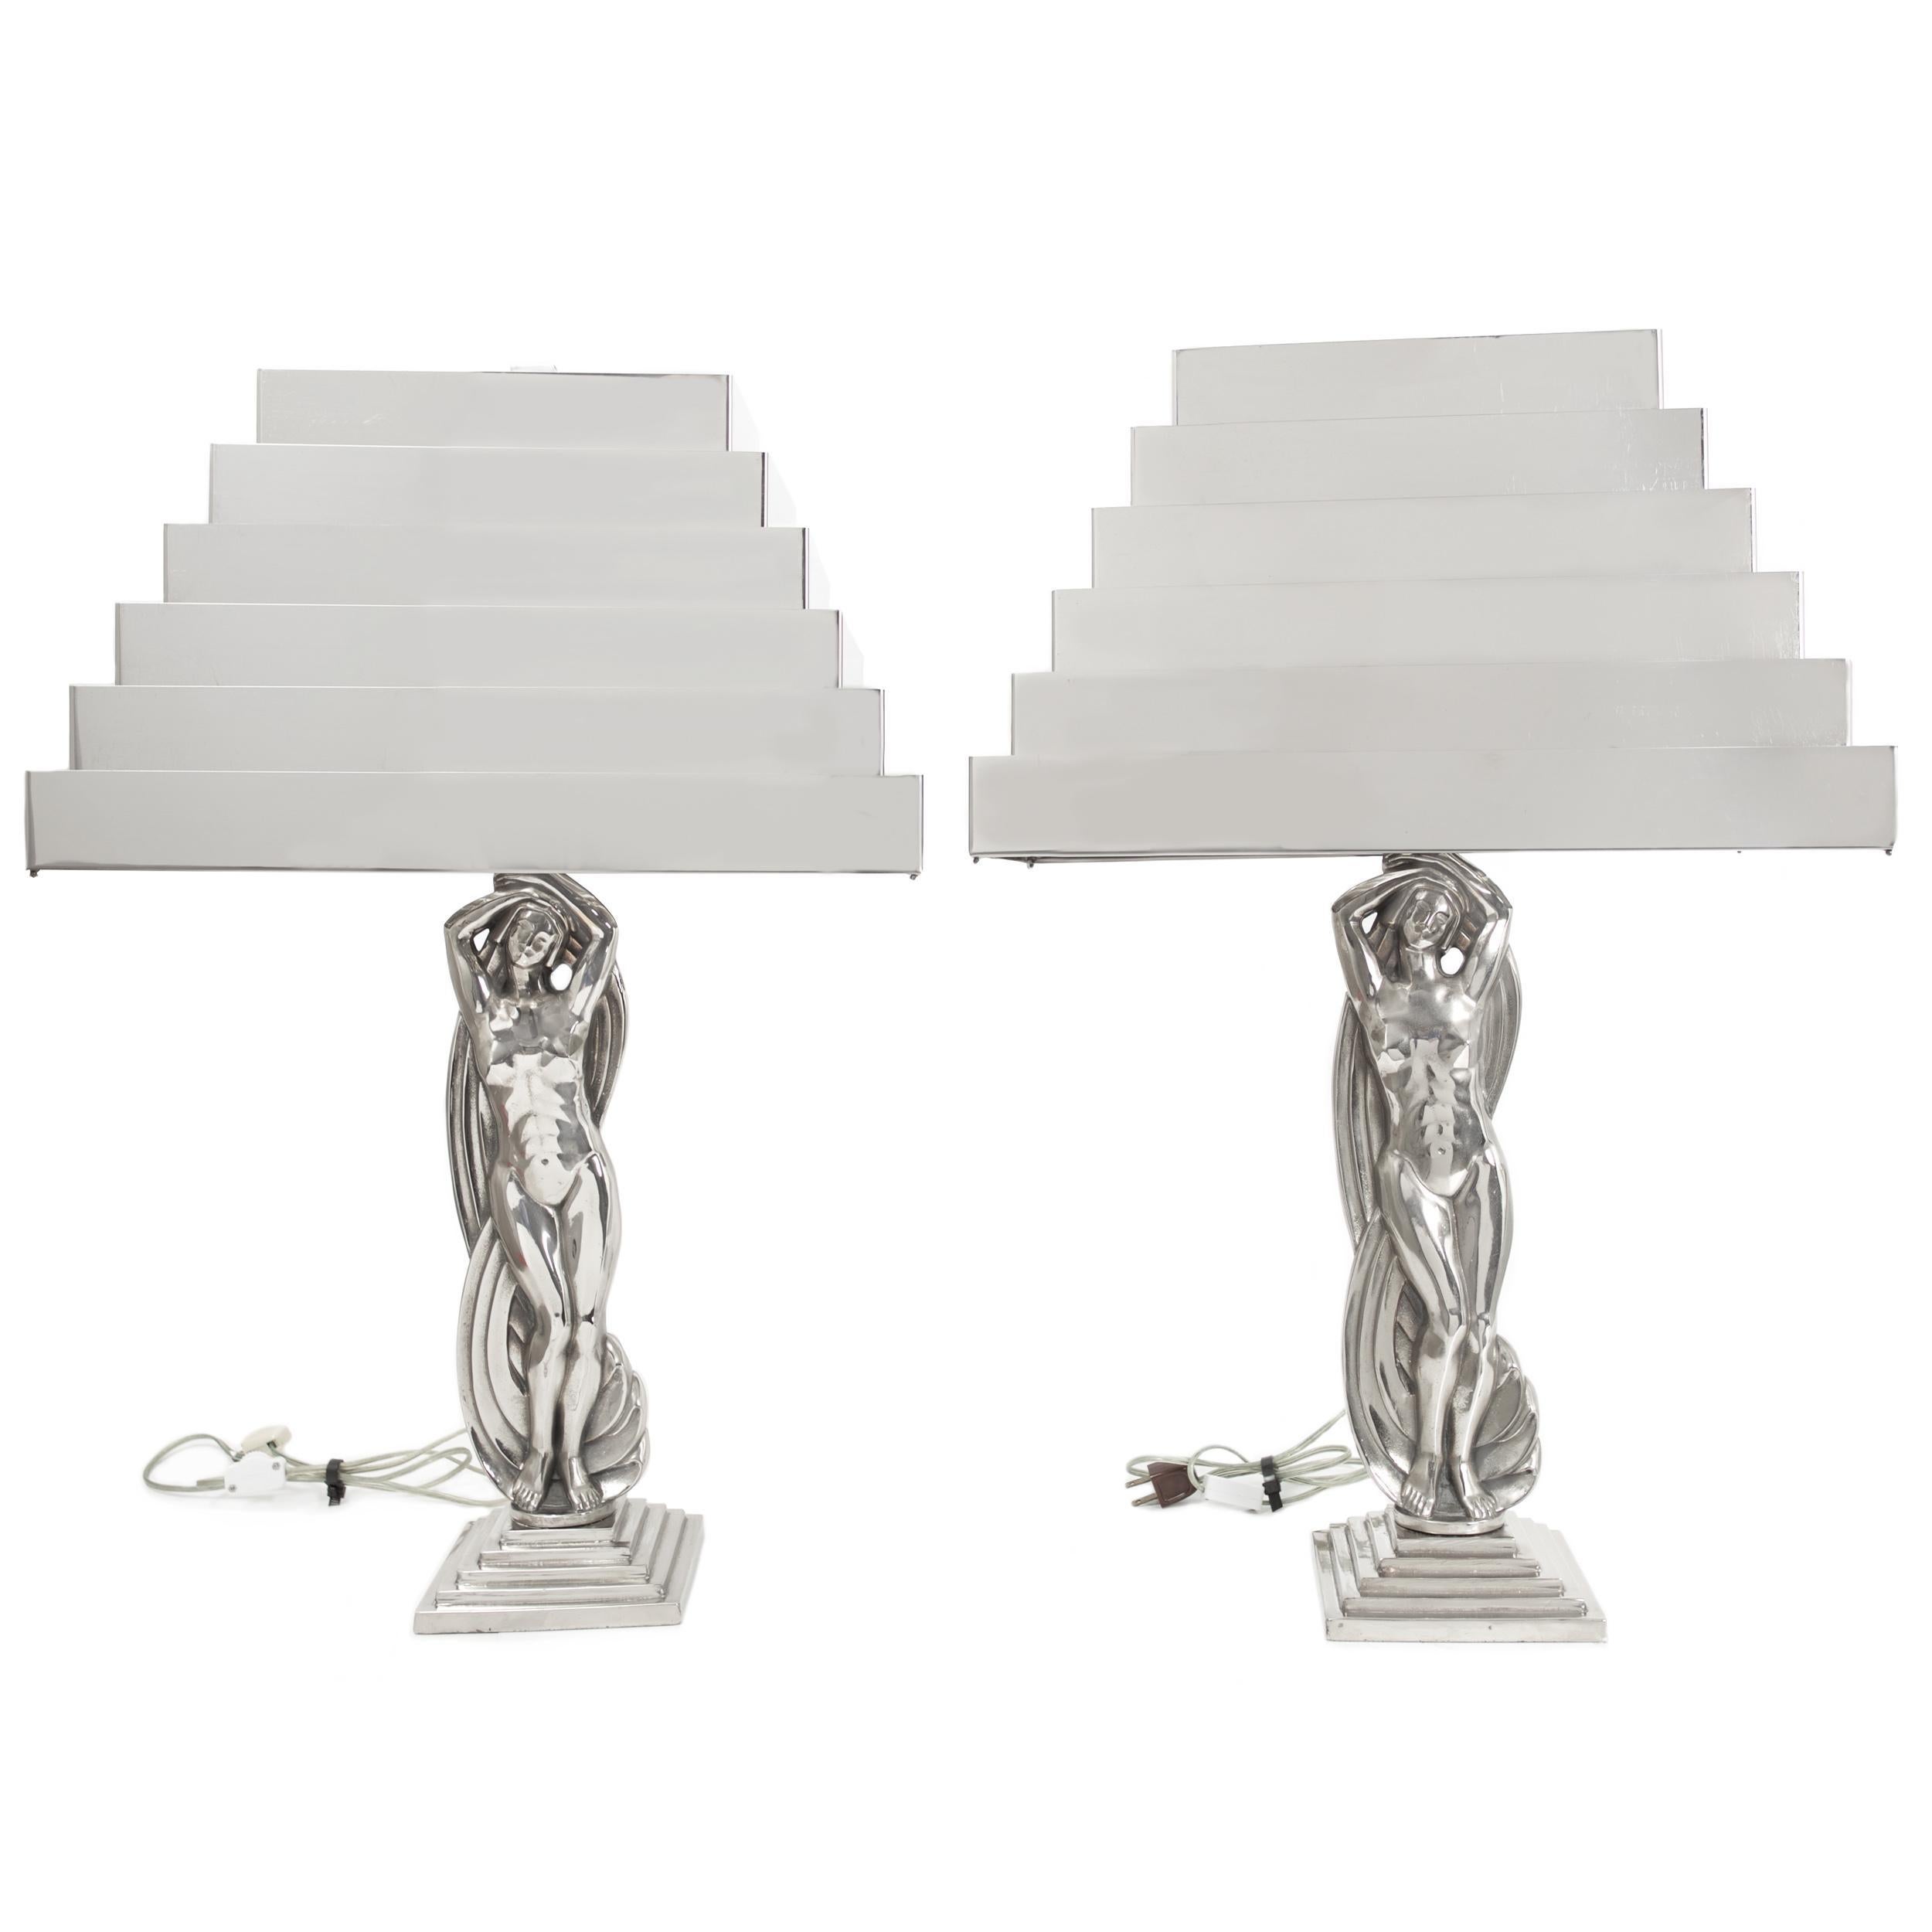 A remarkable pair of Art Deco period lamps depicting stylized female figures standing before swirling twists of fabric over a stepped base raising the lighted elements behind a chromed steel stepped shade. This is a collapsing form designed with